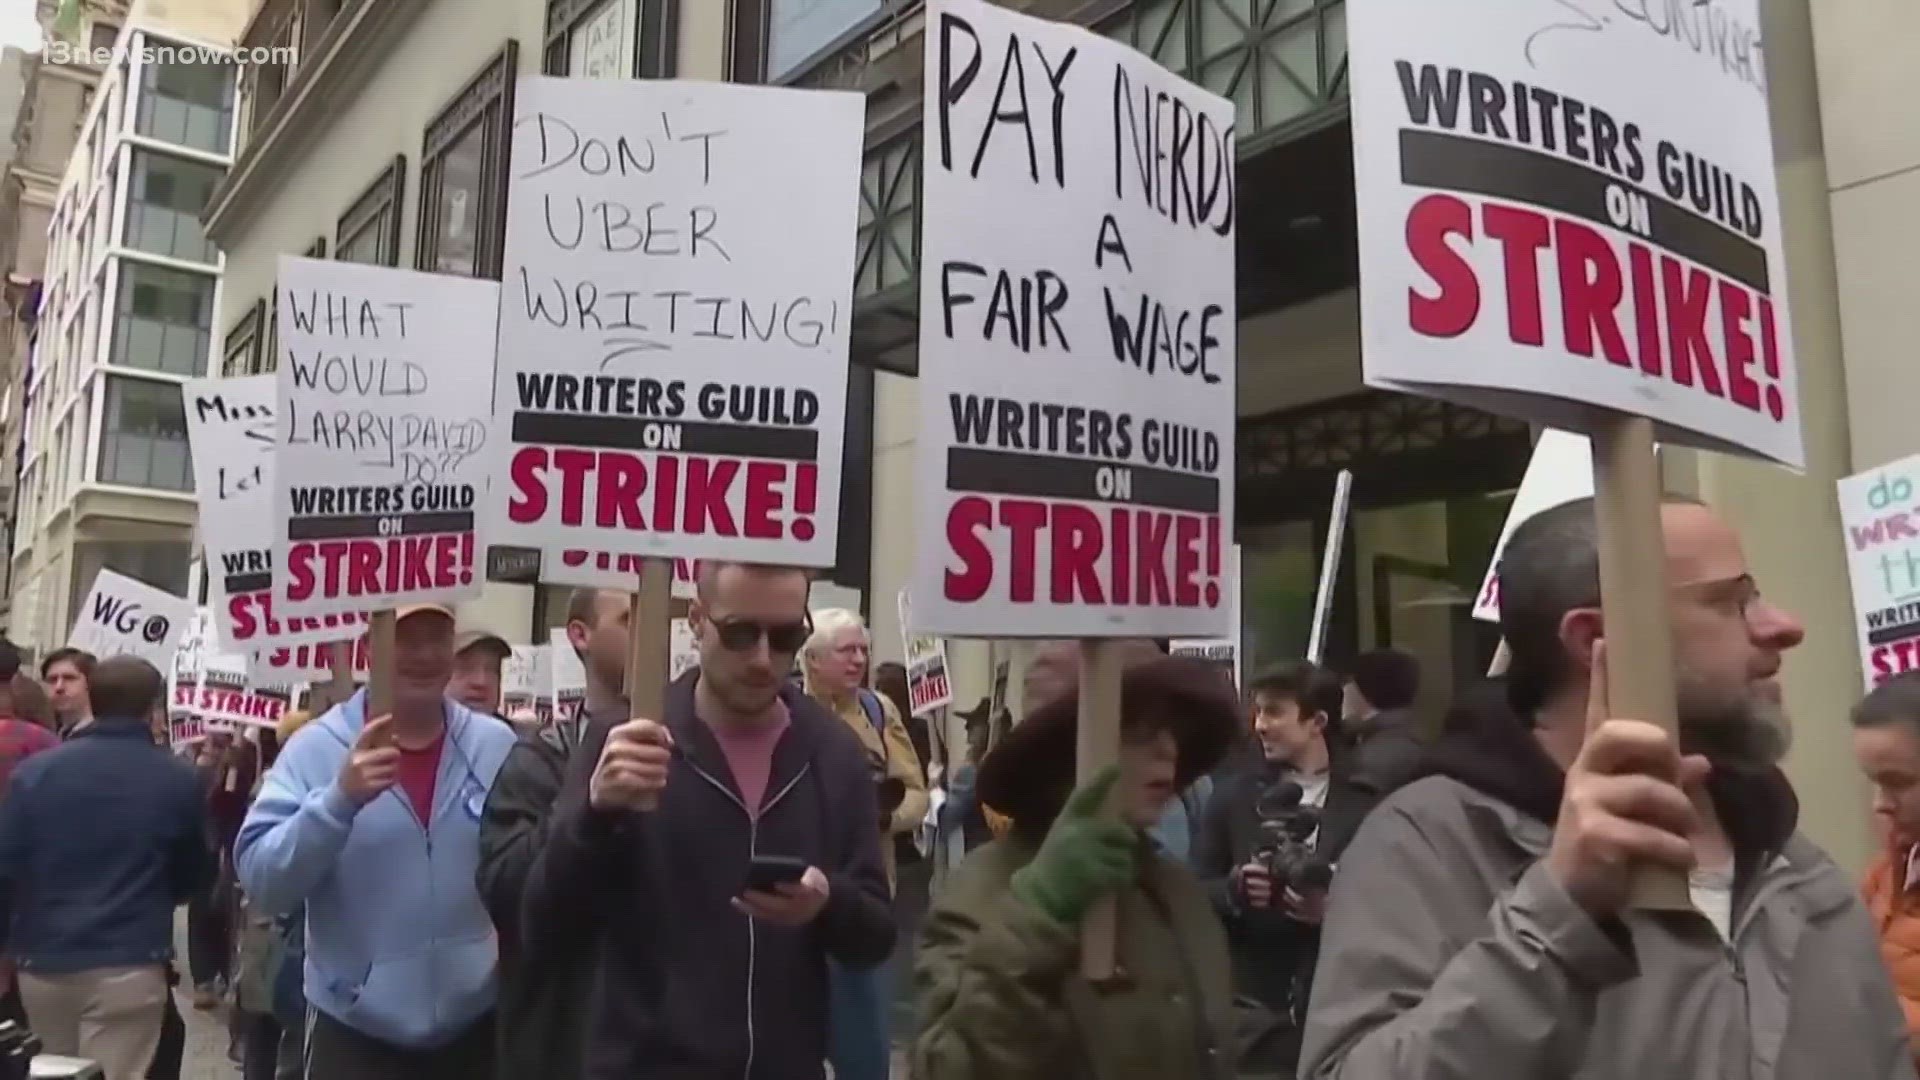 What would a Hollywood writers' strike affect?